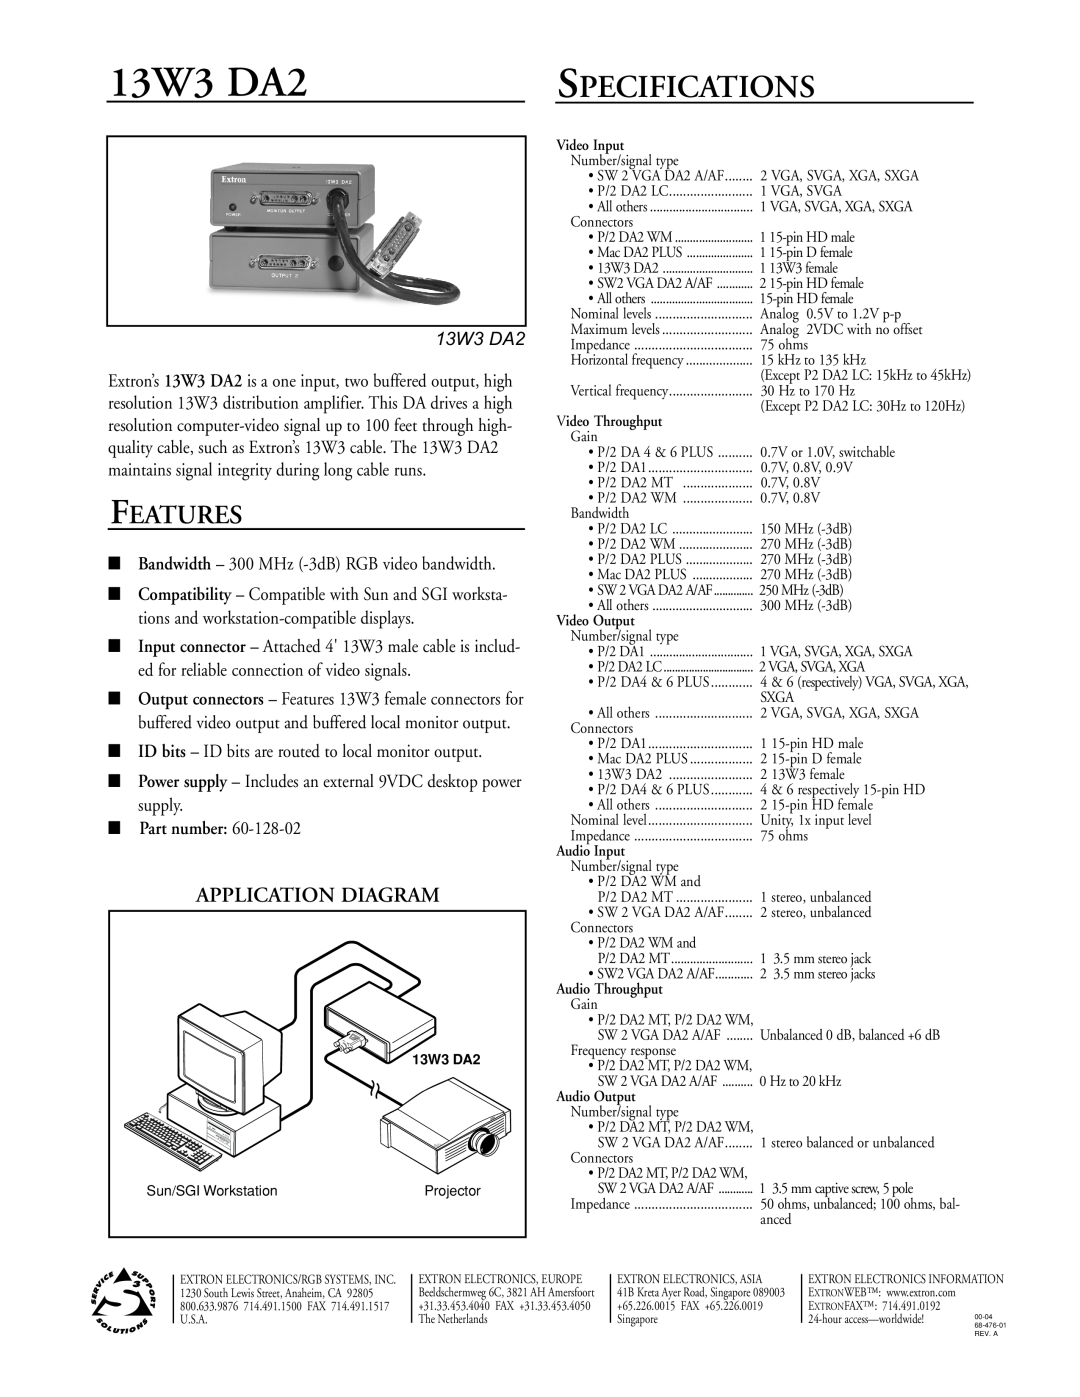 Extron electronic MAC manual 13W3 DA2, Specifications, Features, Application Diagram, Part number 